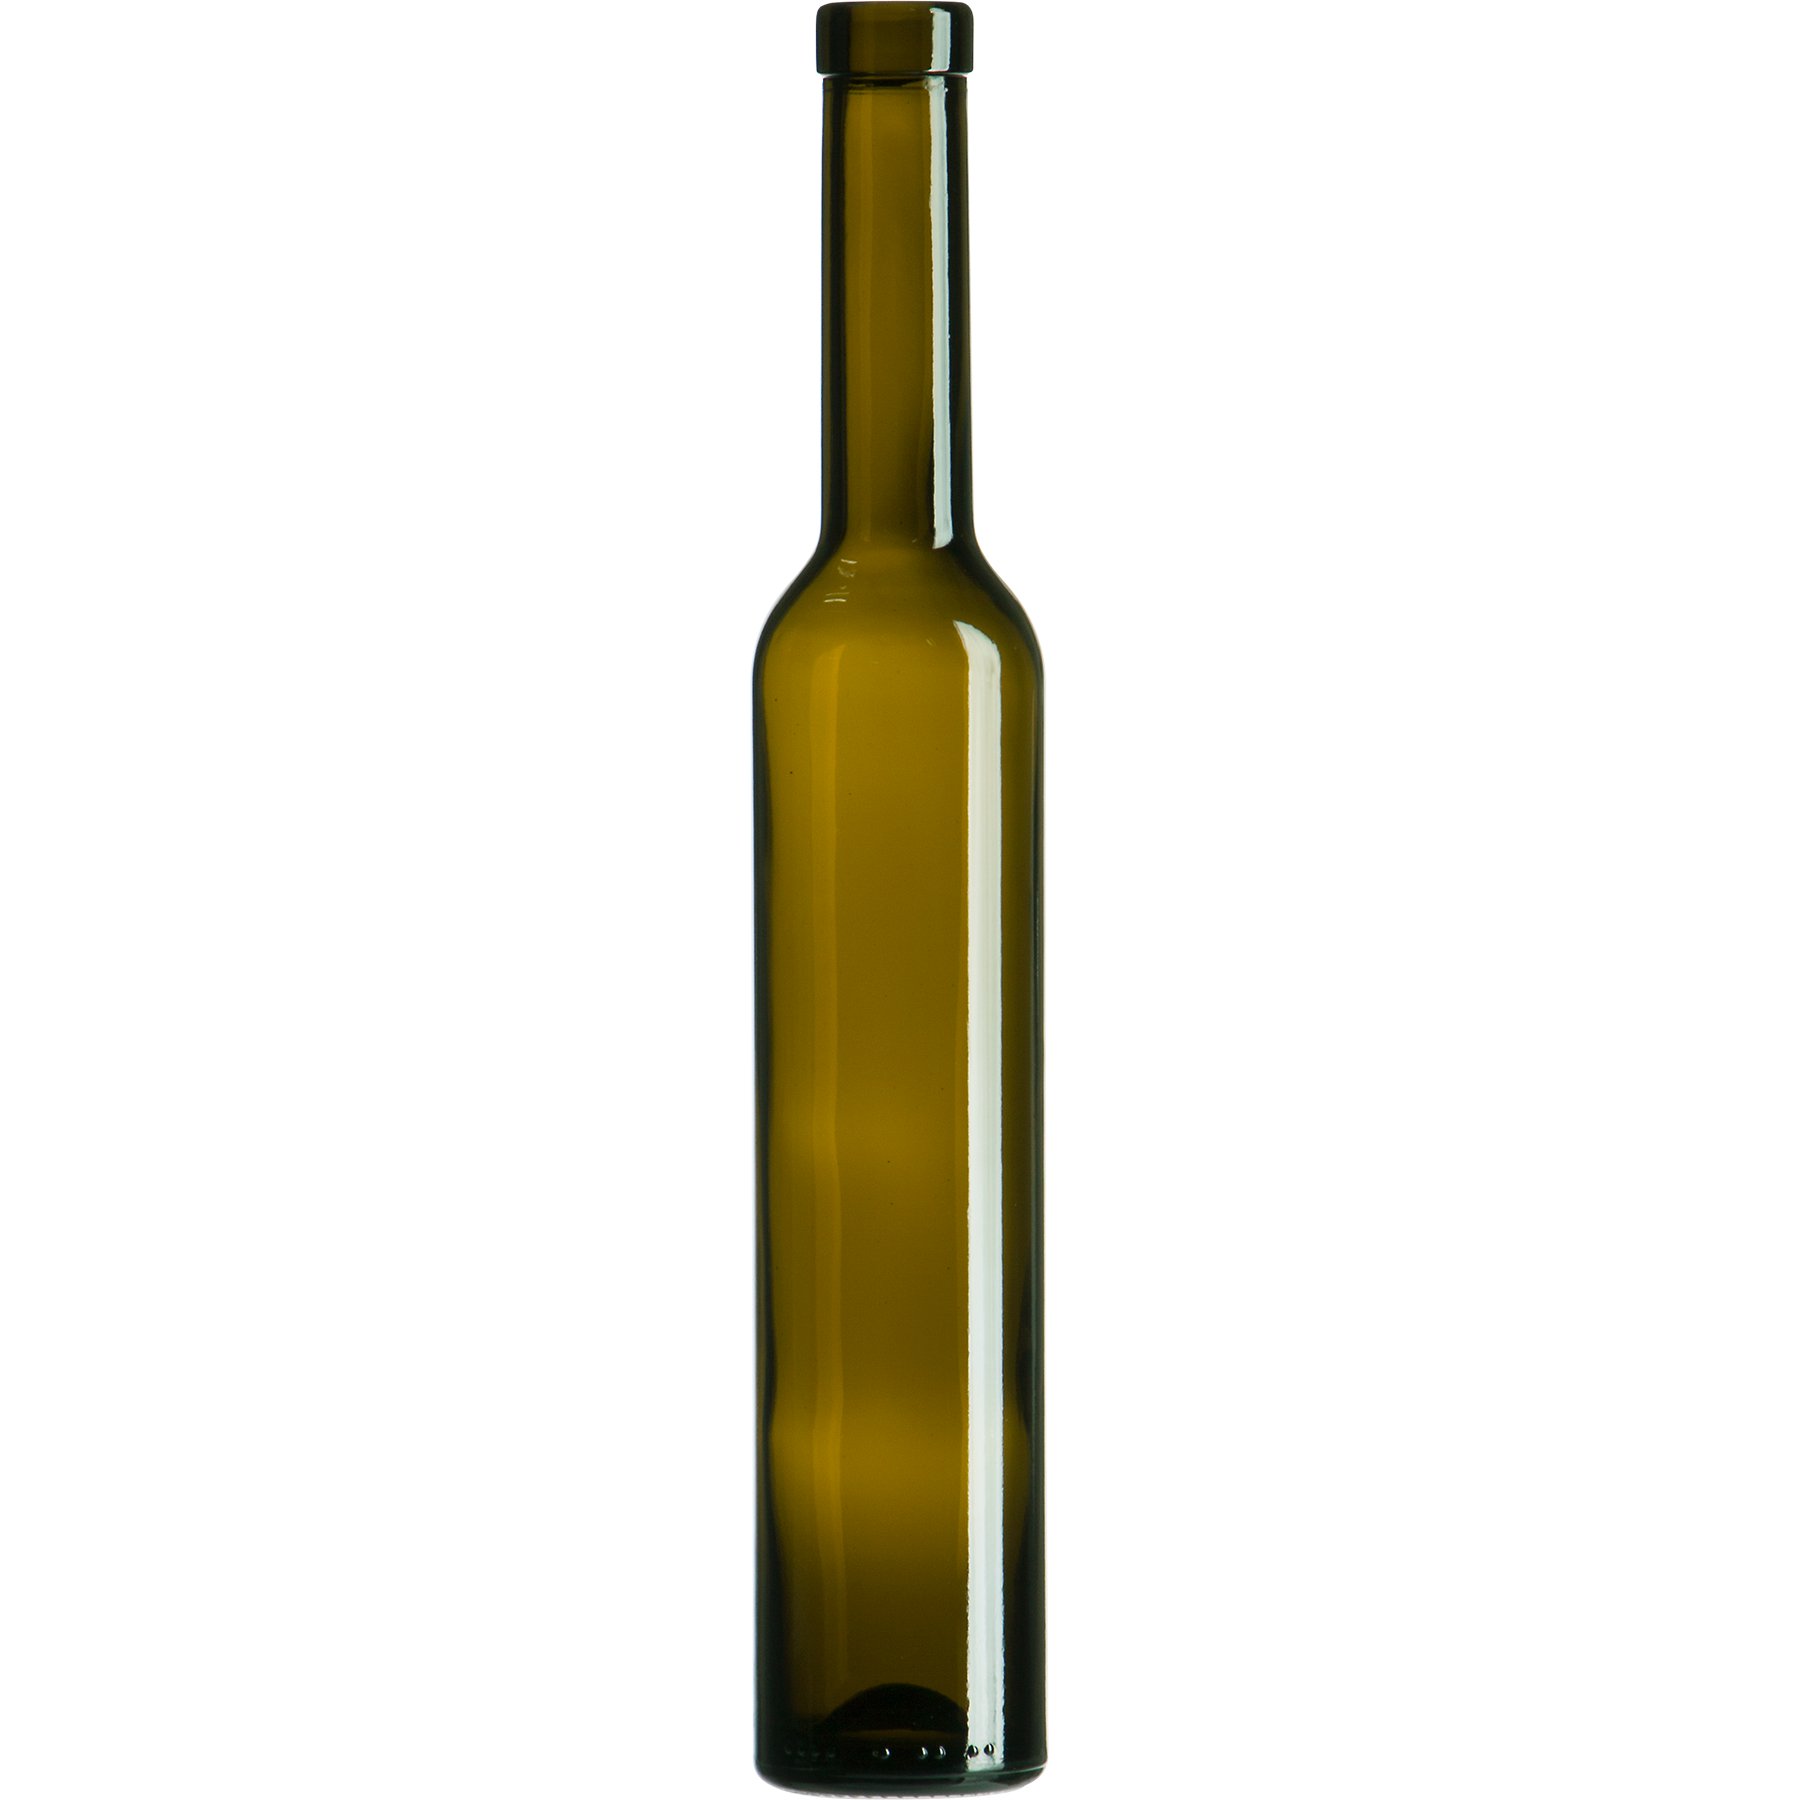 Wine Bottles for Sale, Wholesale - The Cary Company